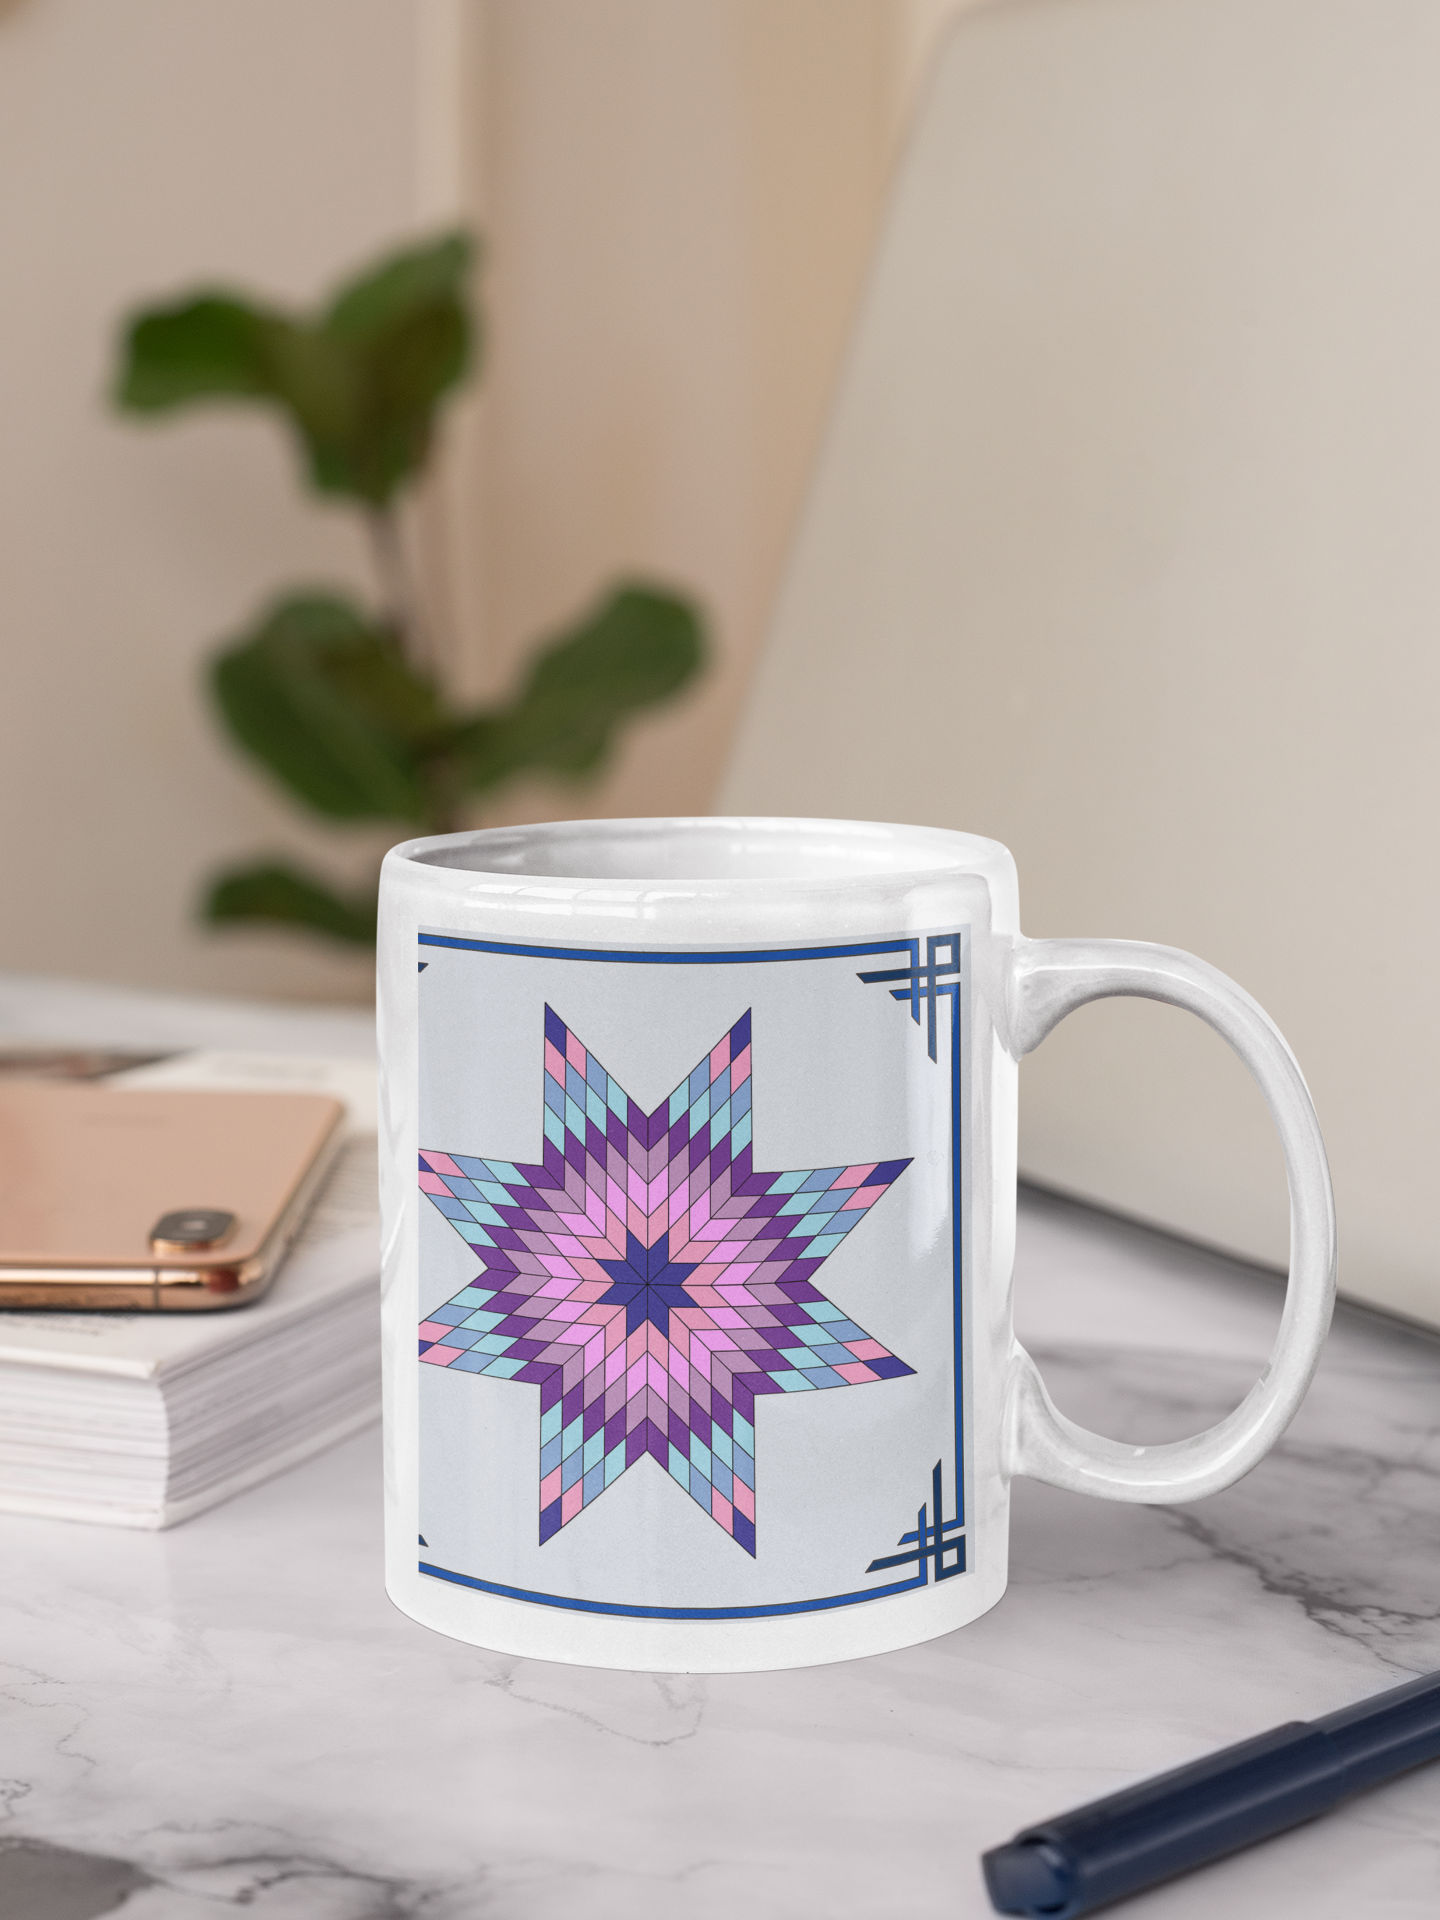 Enjoy a cup of your favorite hot beverage as you plan your new quilting project! The Star of Bethlehem Quilt Design 11 oz. Mug is a reproduction of a fine art design by artist Lee M. Buchanan and has the image on the front and back of the mug. This pattern style is usually listed in the Octogons, Diamonds and 8-Point Star group. If you love to quilt or appreciate the style and craftsmanship involved, this mug will be a favorite part of your quilting enjoyment!